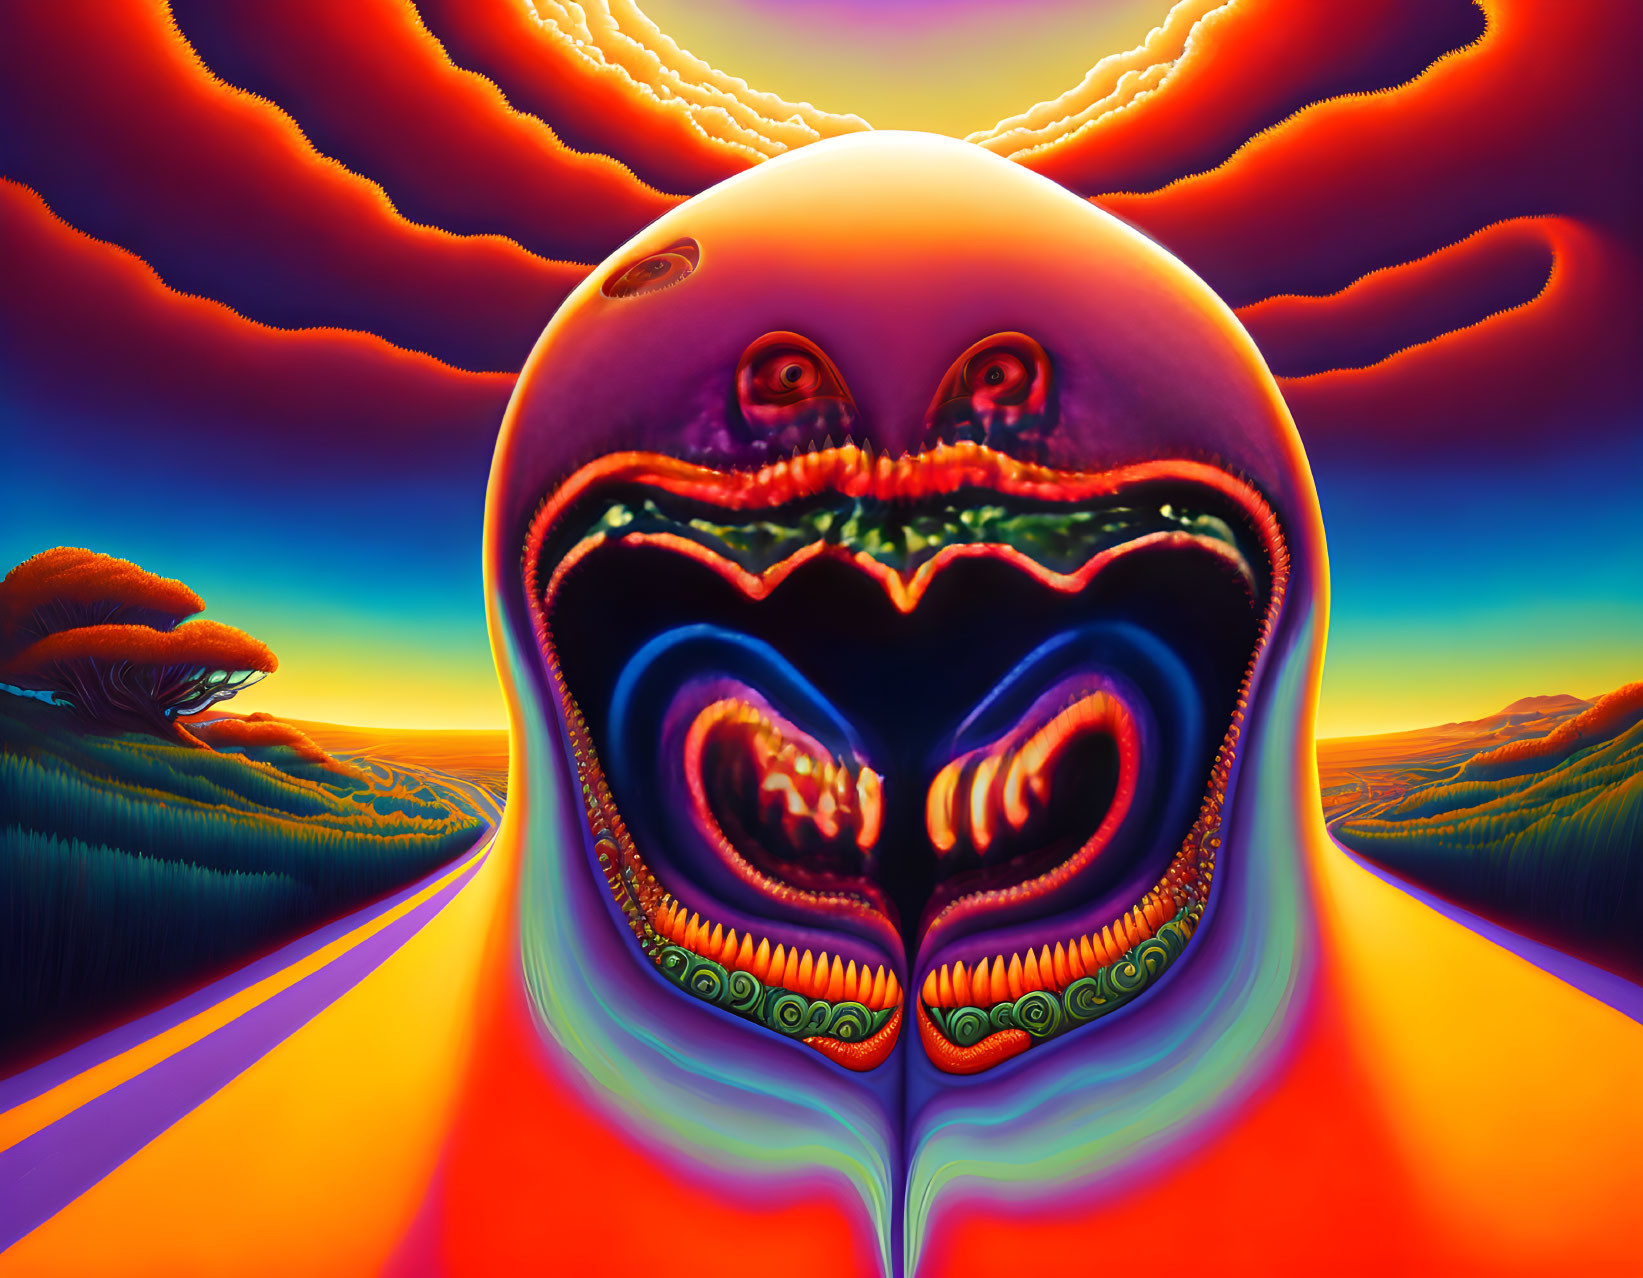 Colorful Psychedelic Landscape with Surreal Face and Road Under Orange Sky